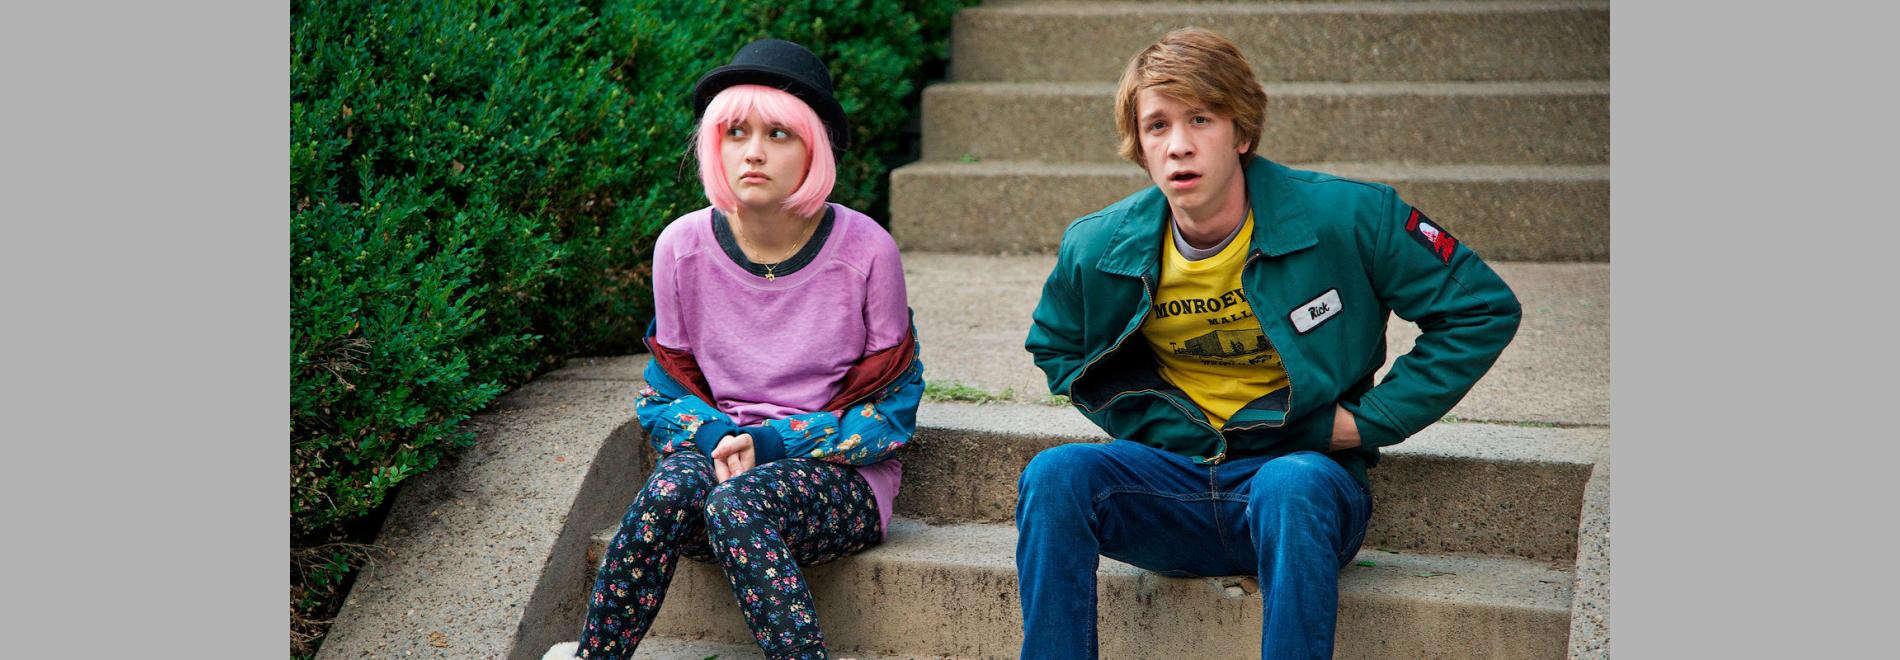 Me and Earl and the Dying Girl (Alfonso Gómez-Rejón, 2015)